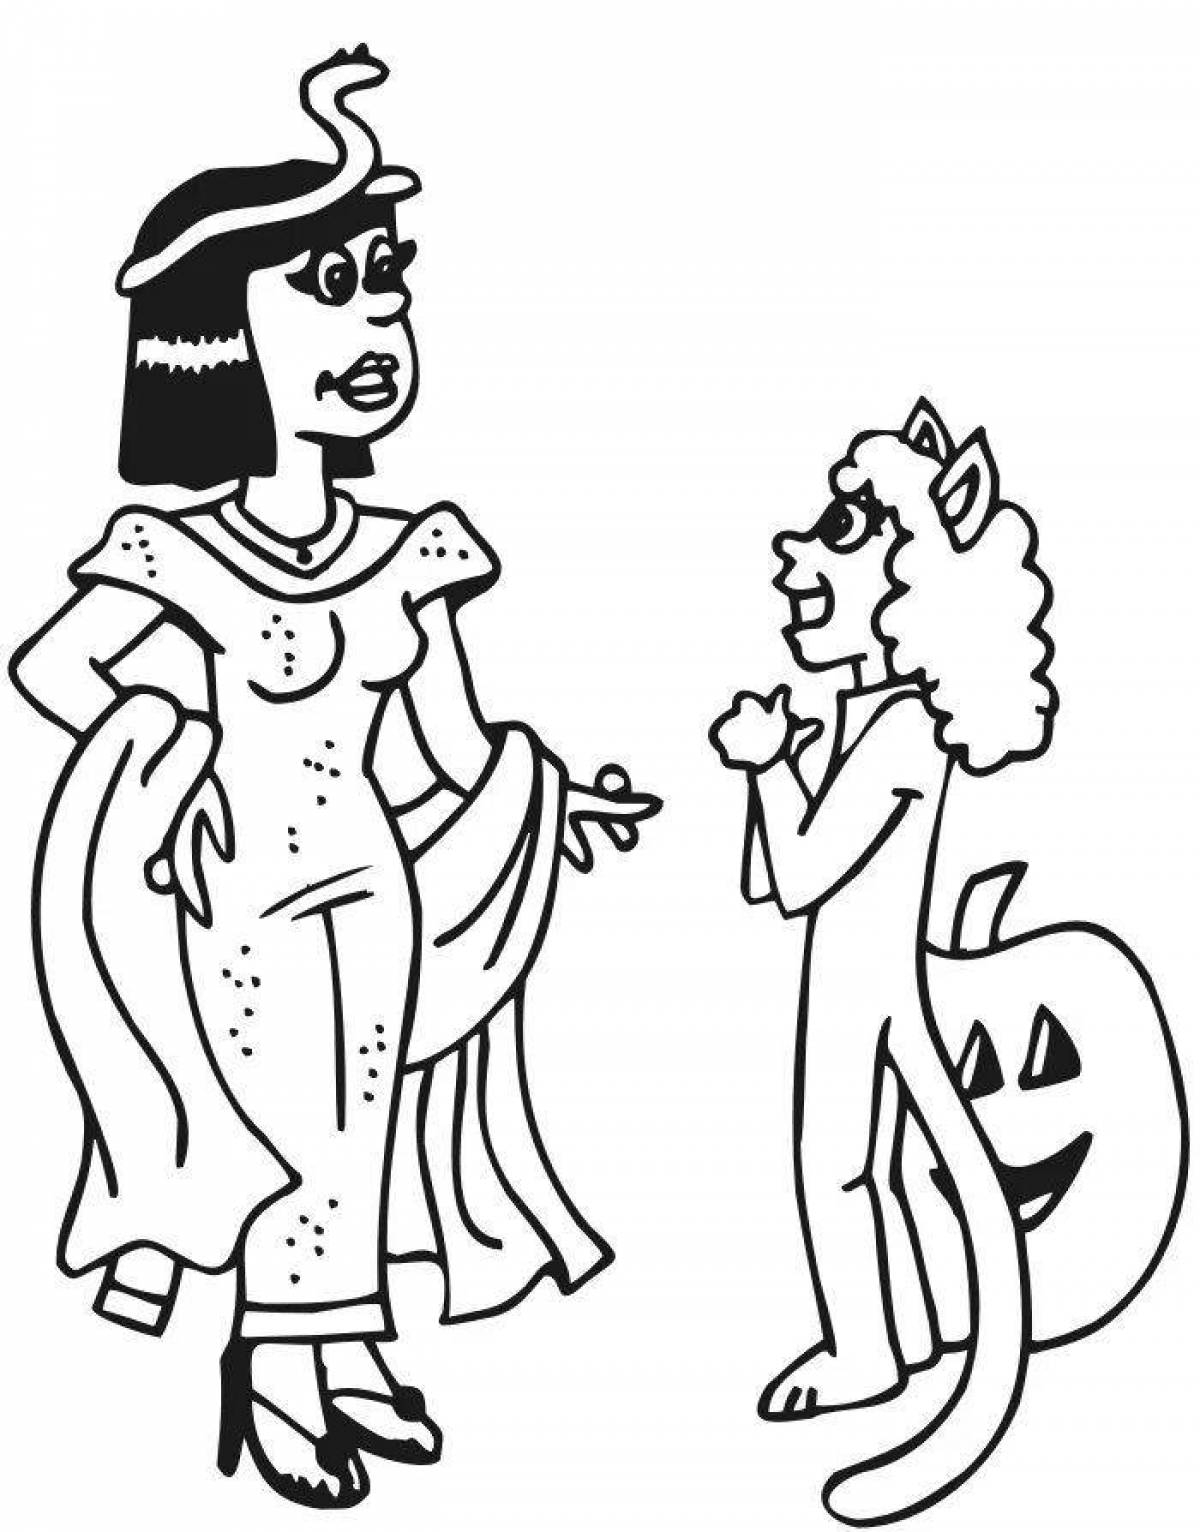 Cleopatra awesome coloring book